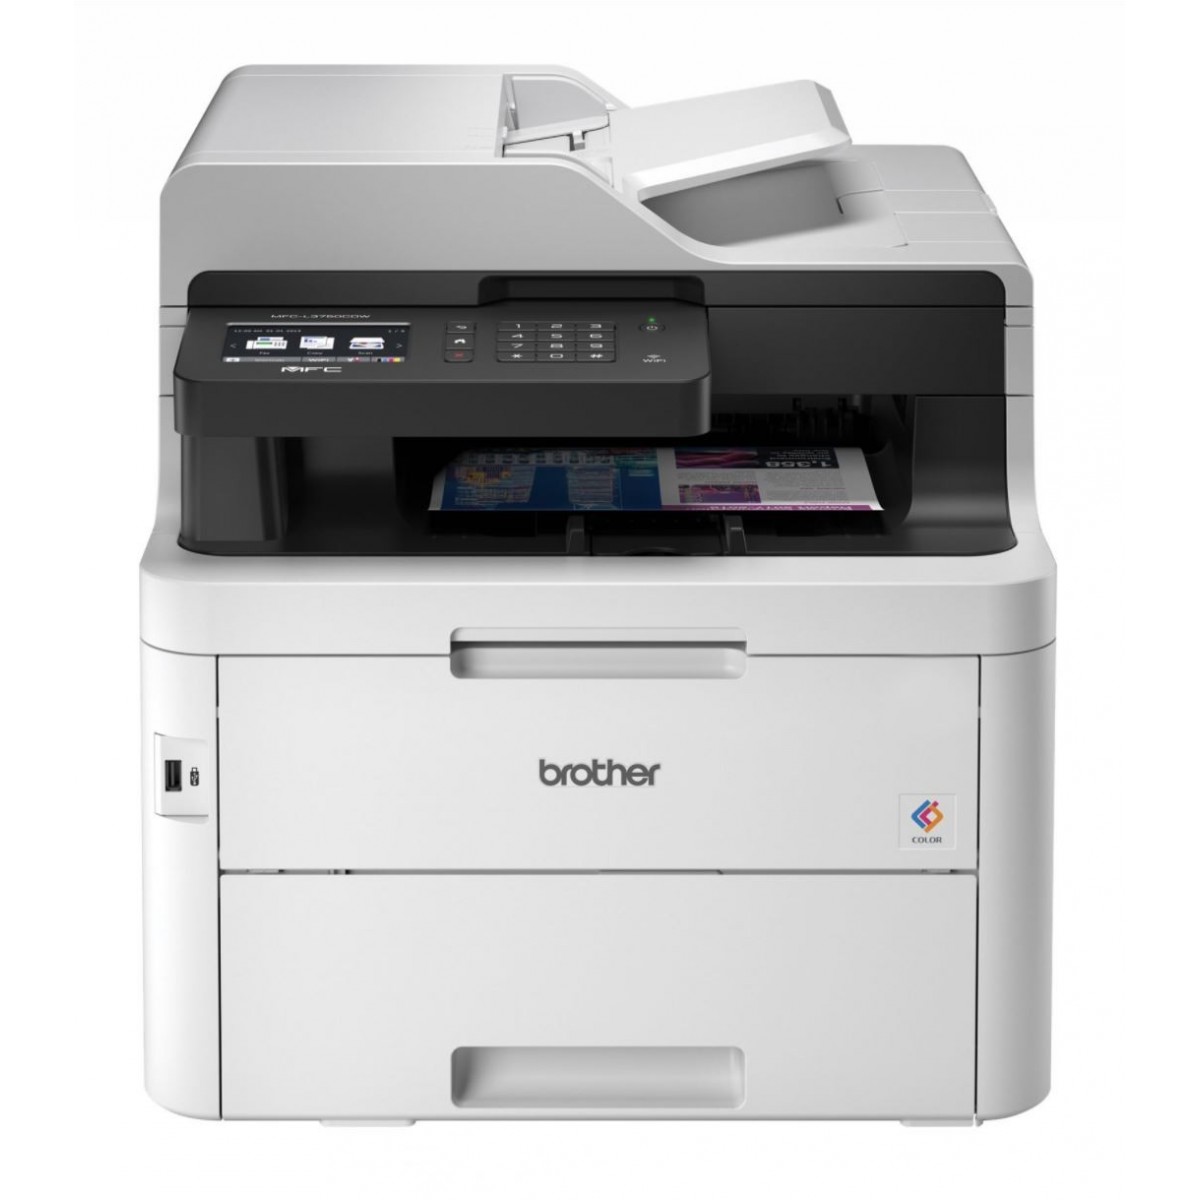 Brother MFC-L3750CDW - LED - Colour printing - 2400 x 600 DPI - Colour copying - A4 - Black - White